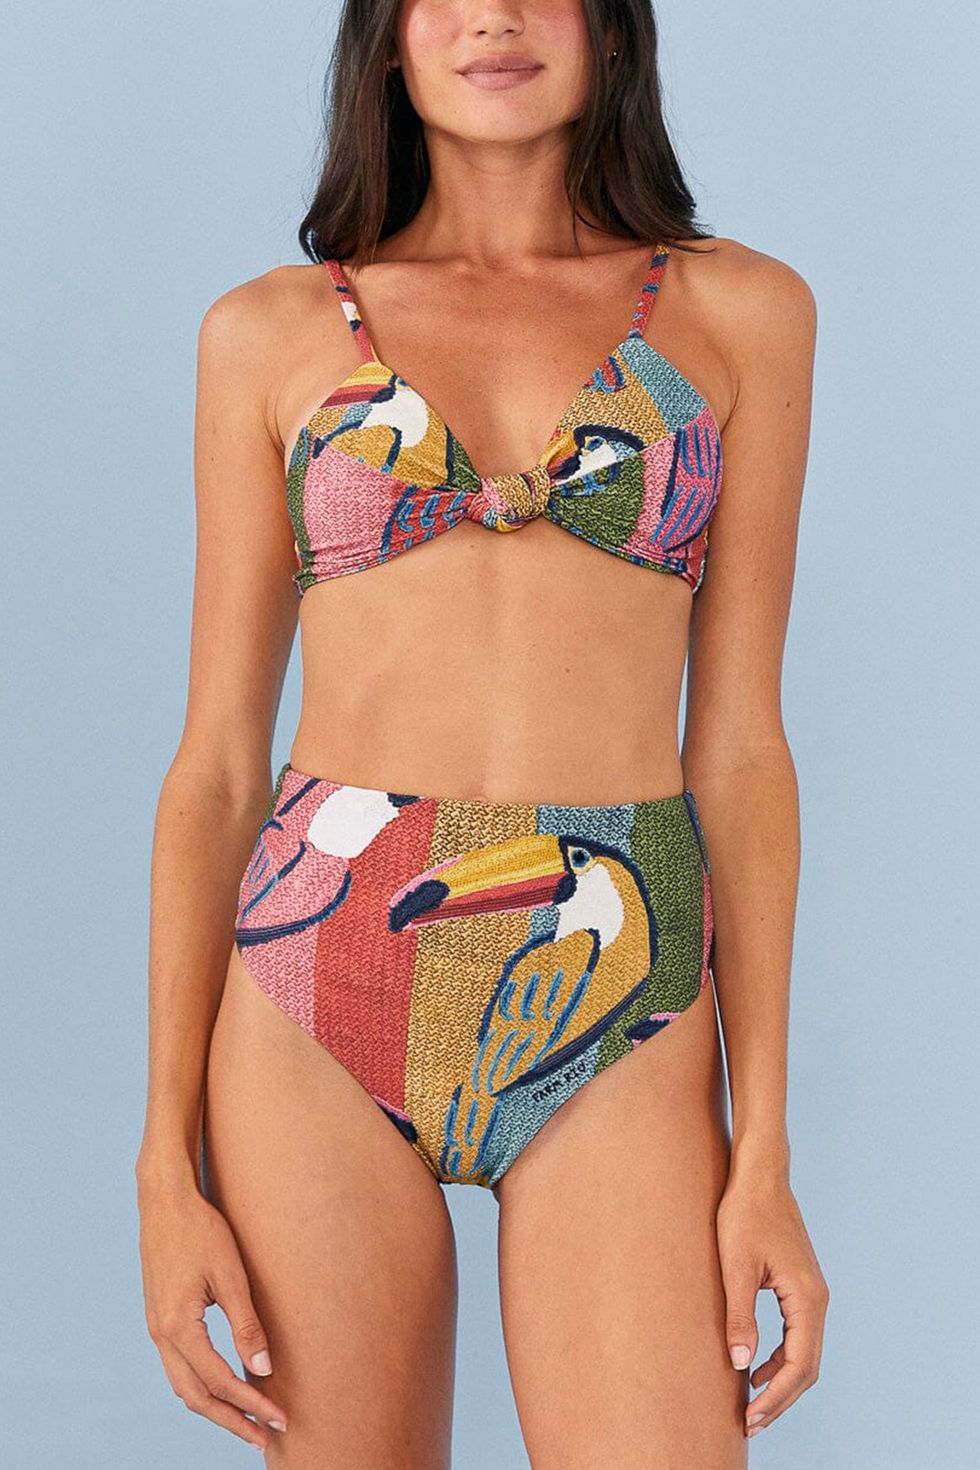 Spot Print High Waisted Bikini Bottoms With Ruched Sides